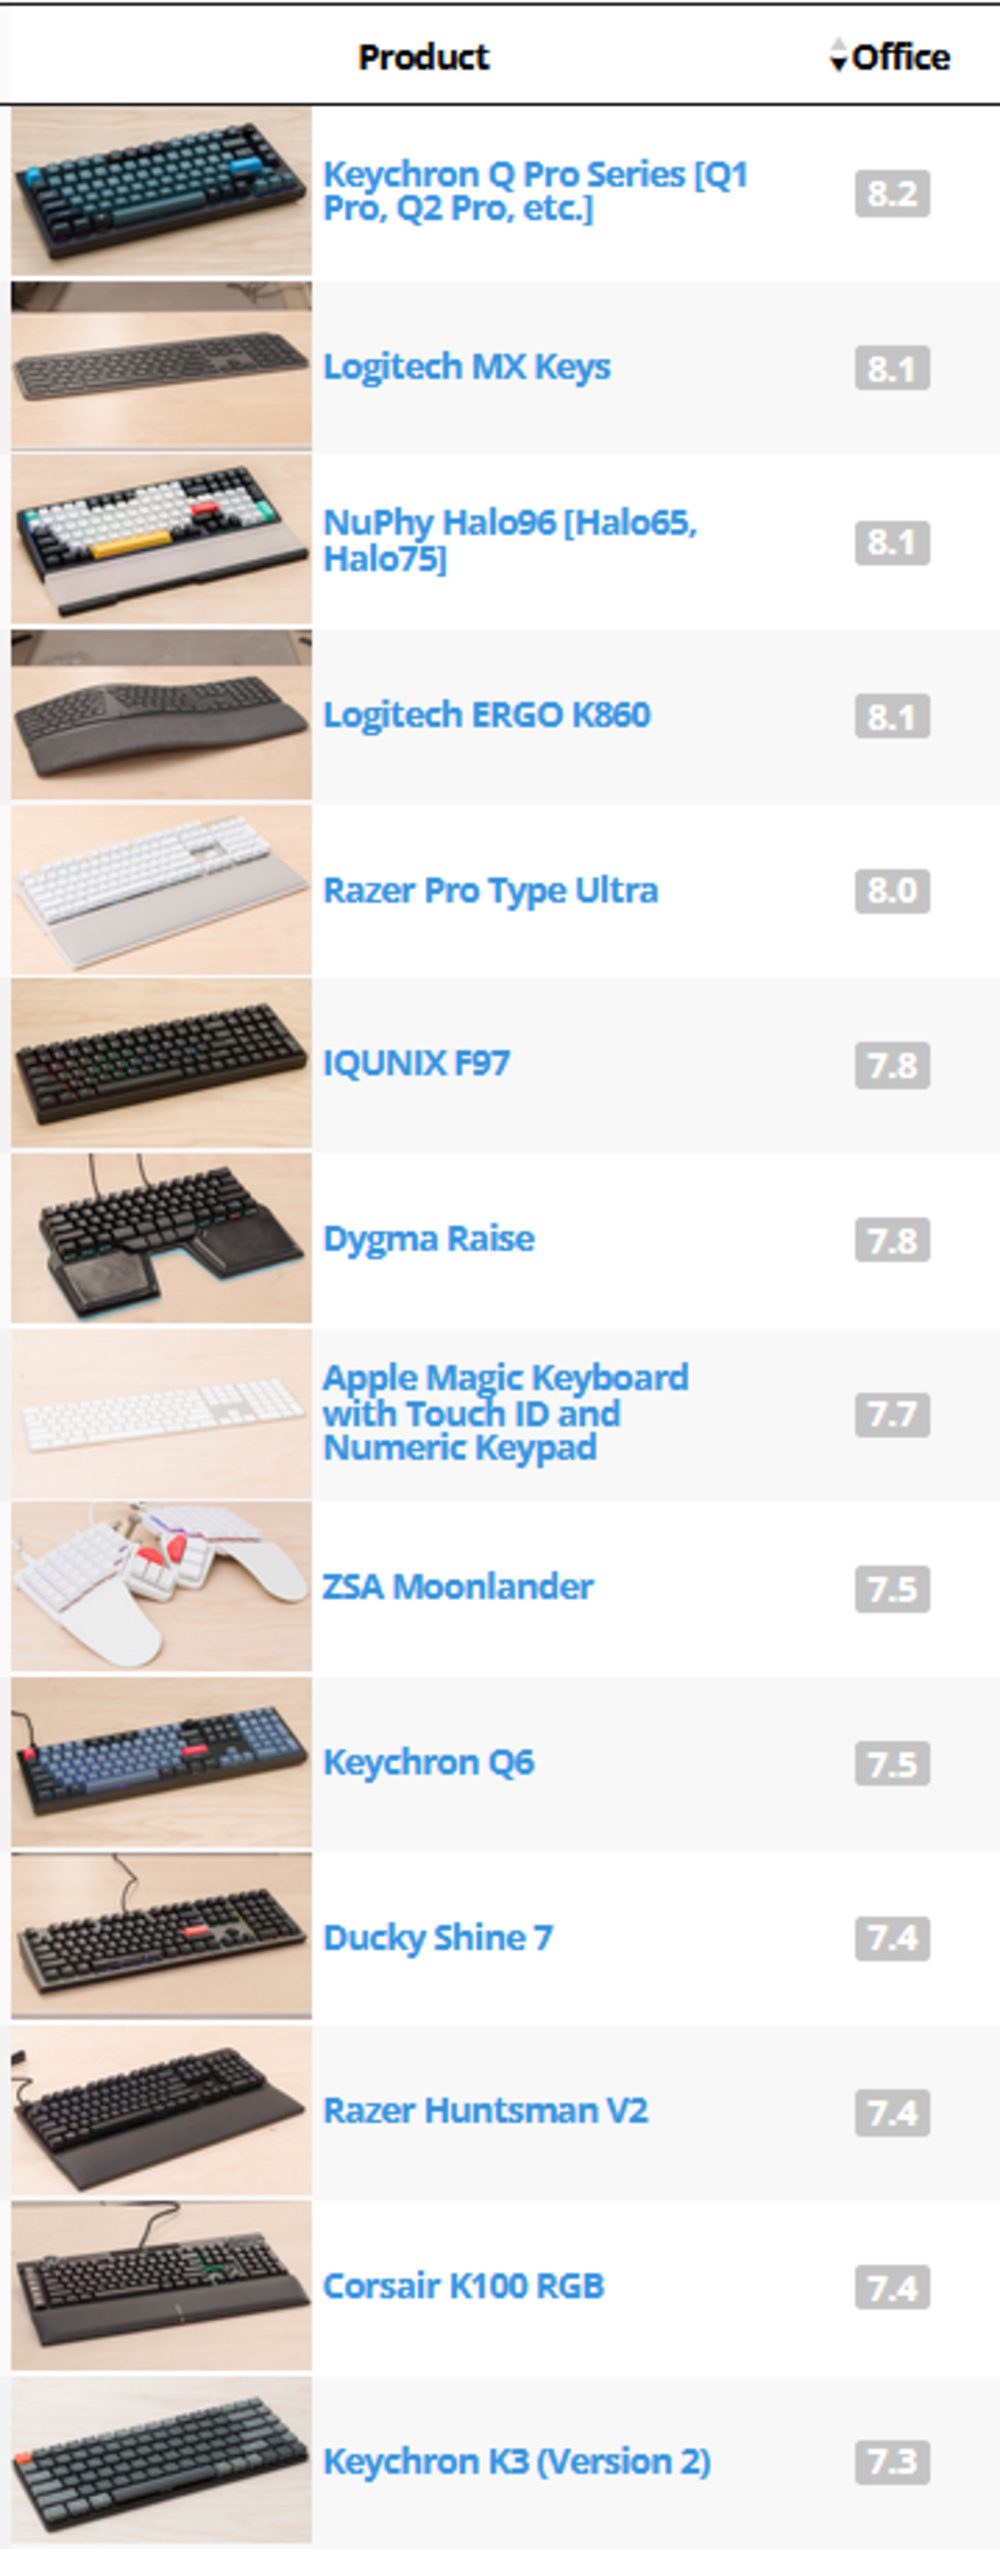 A table view of the highest scoring office keyboards on our new methodology.